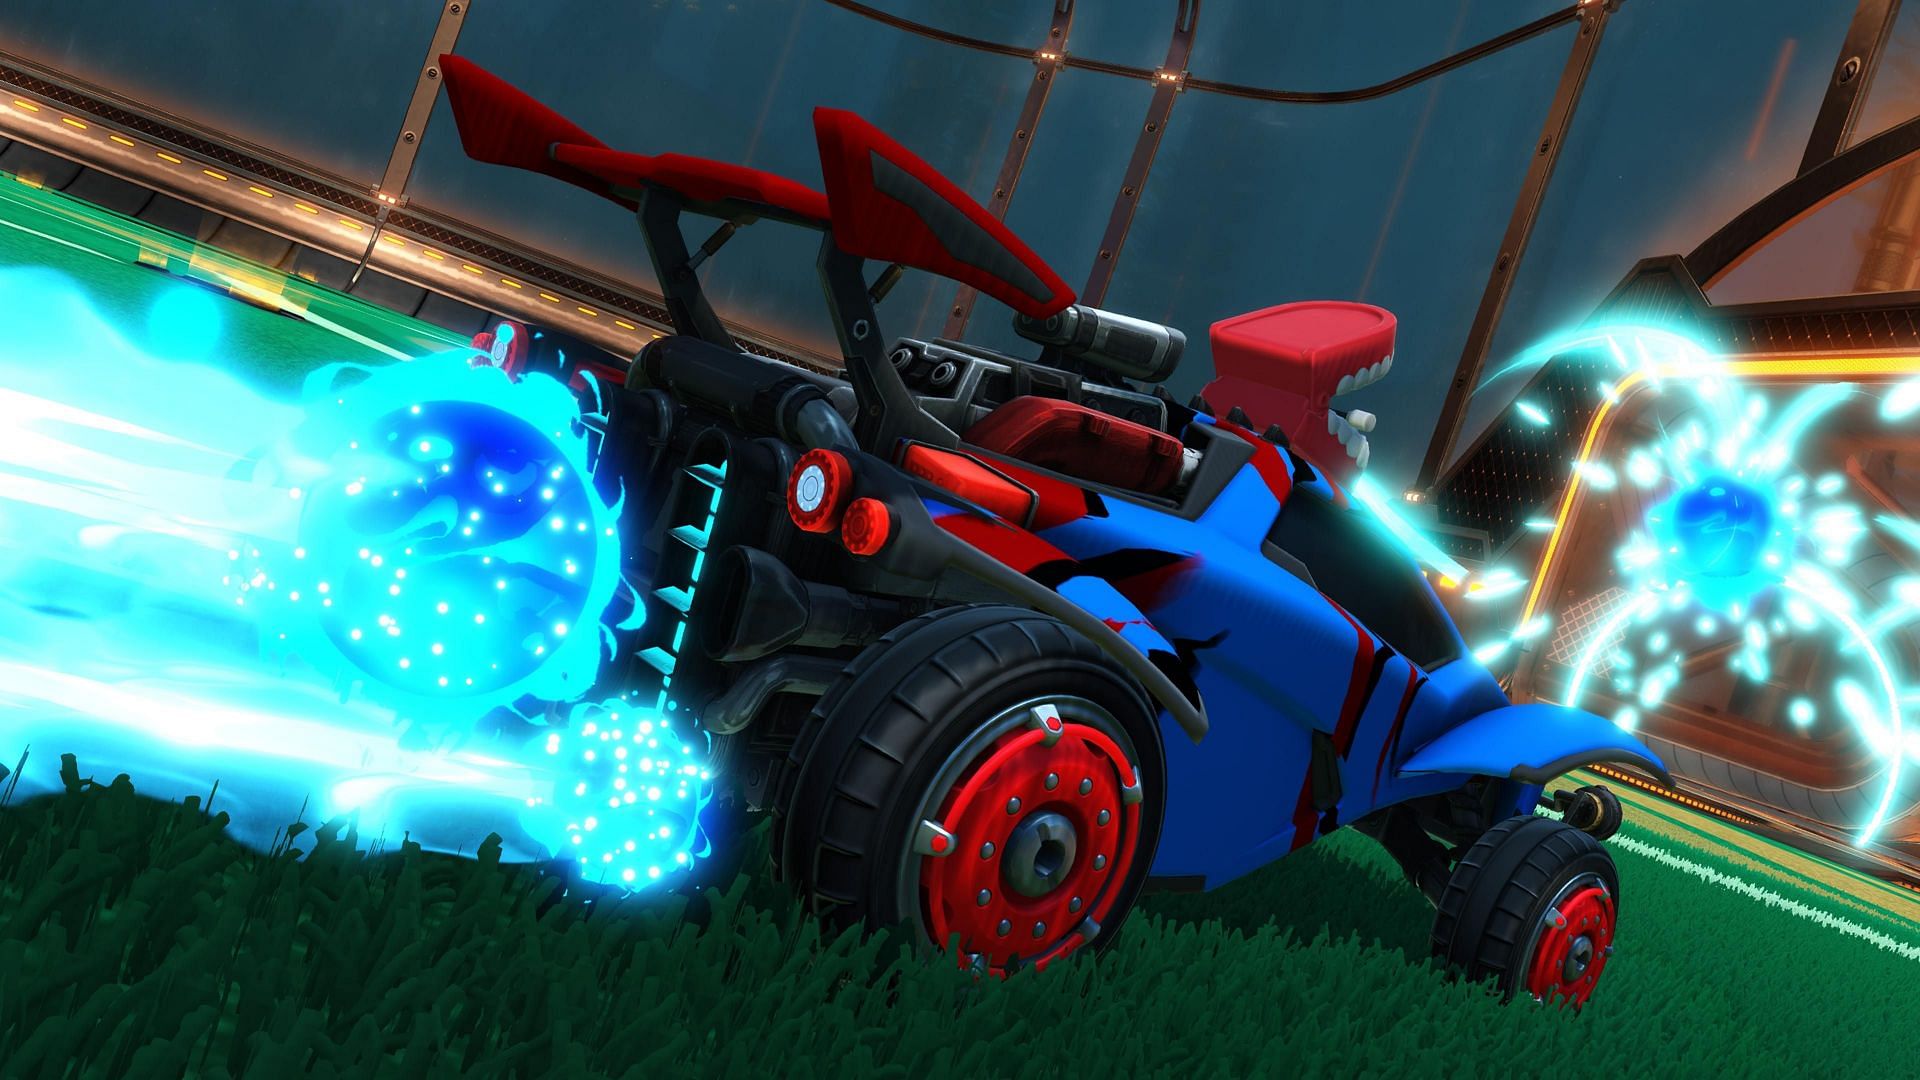 Fortnite Rocket Racing to get two new cars from Rocket League soon (Image via Epic Games/Rocket League)